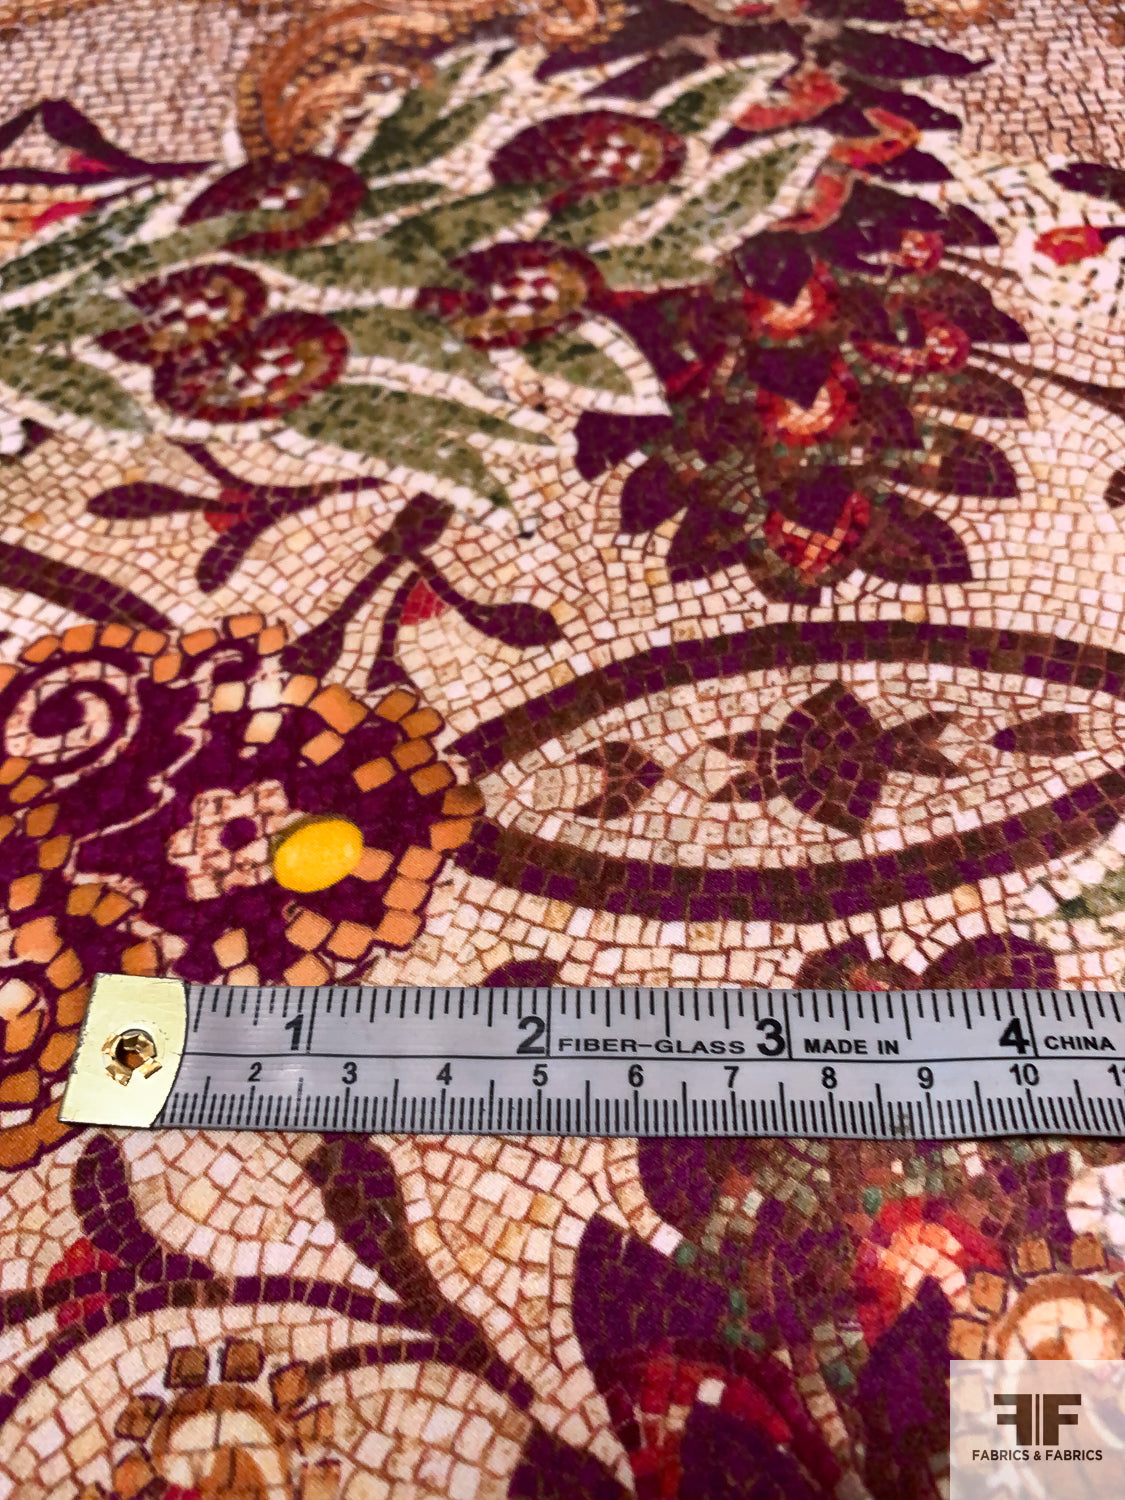 Italian Mosaic Paisley Inspired Printed Soft Viscose Satin - Dirty Orange / White Red / Forest Green